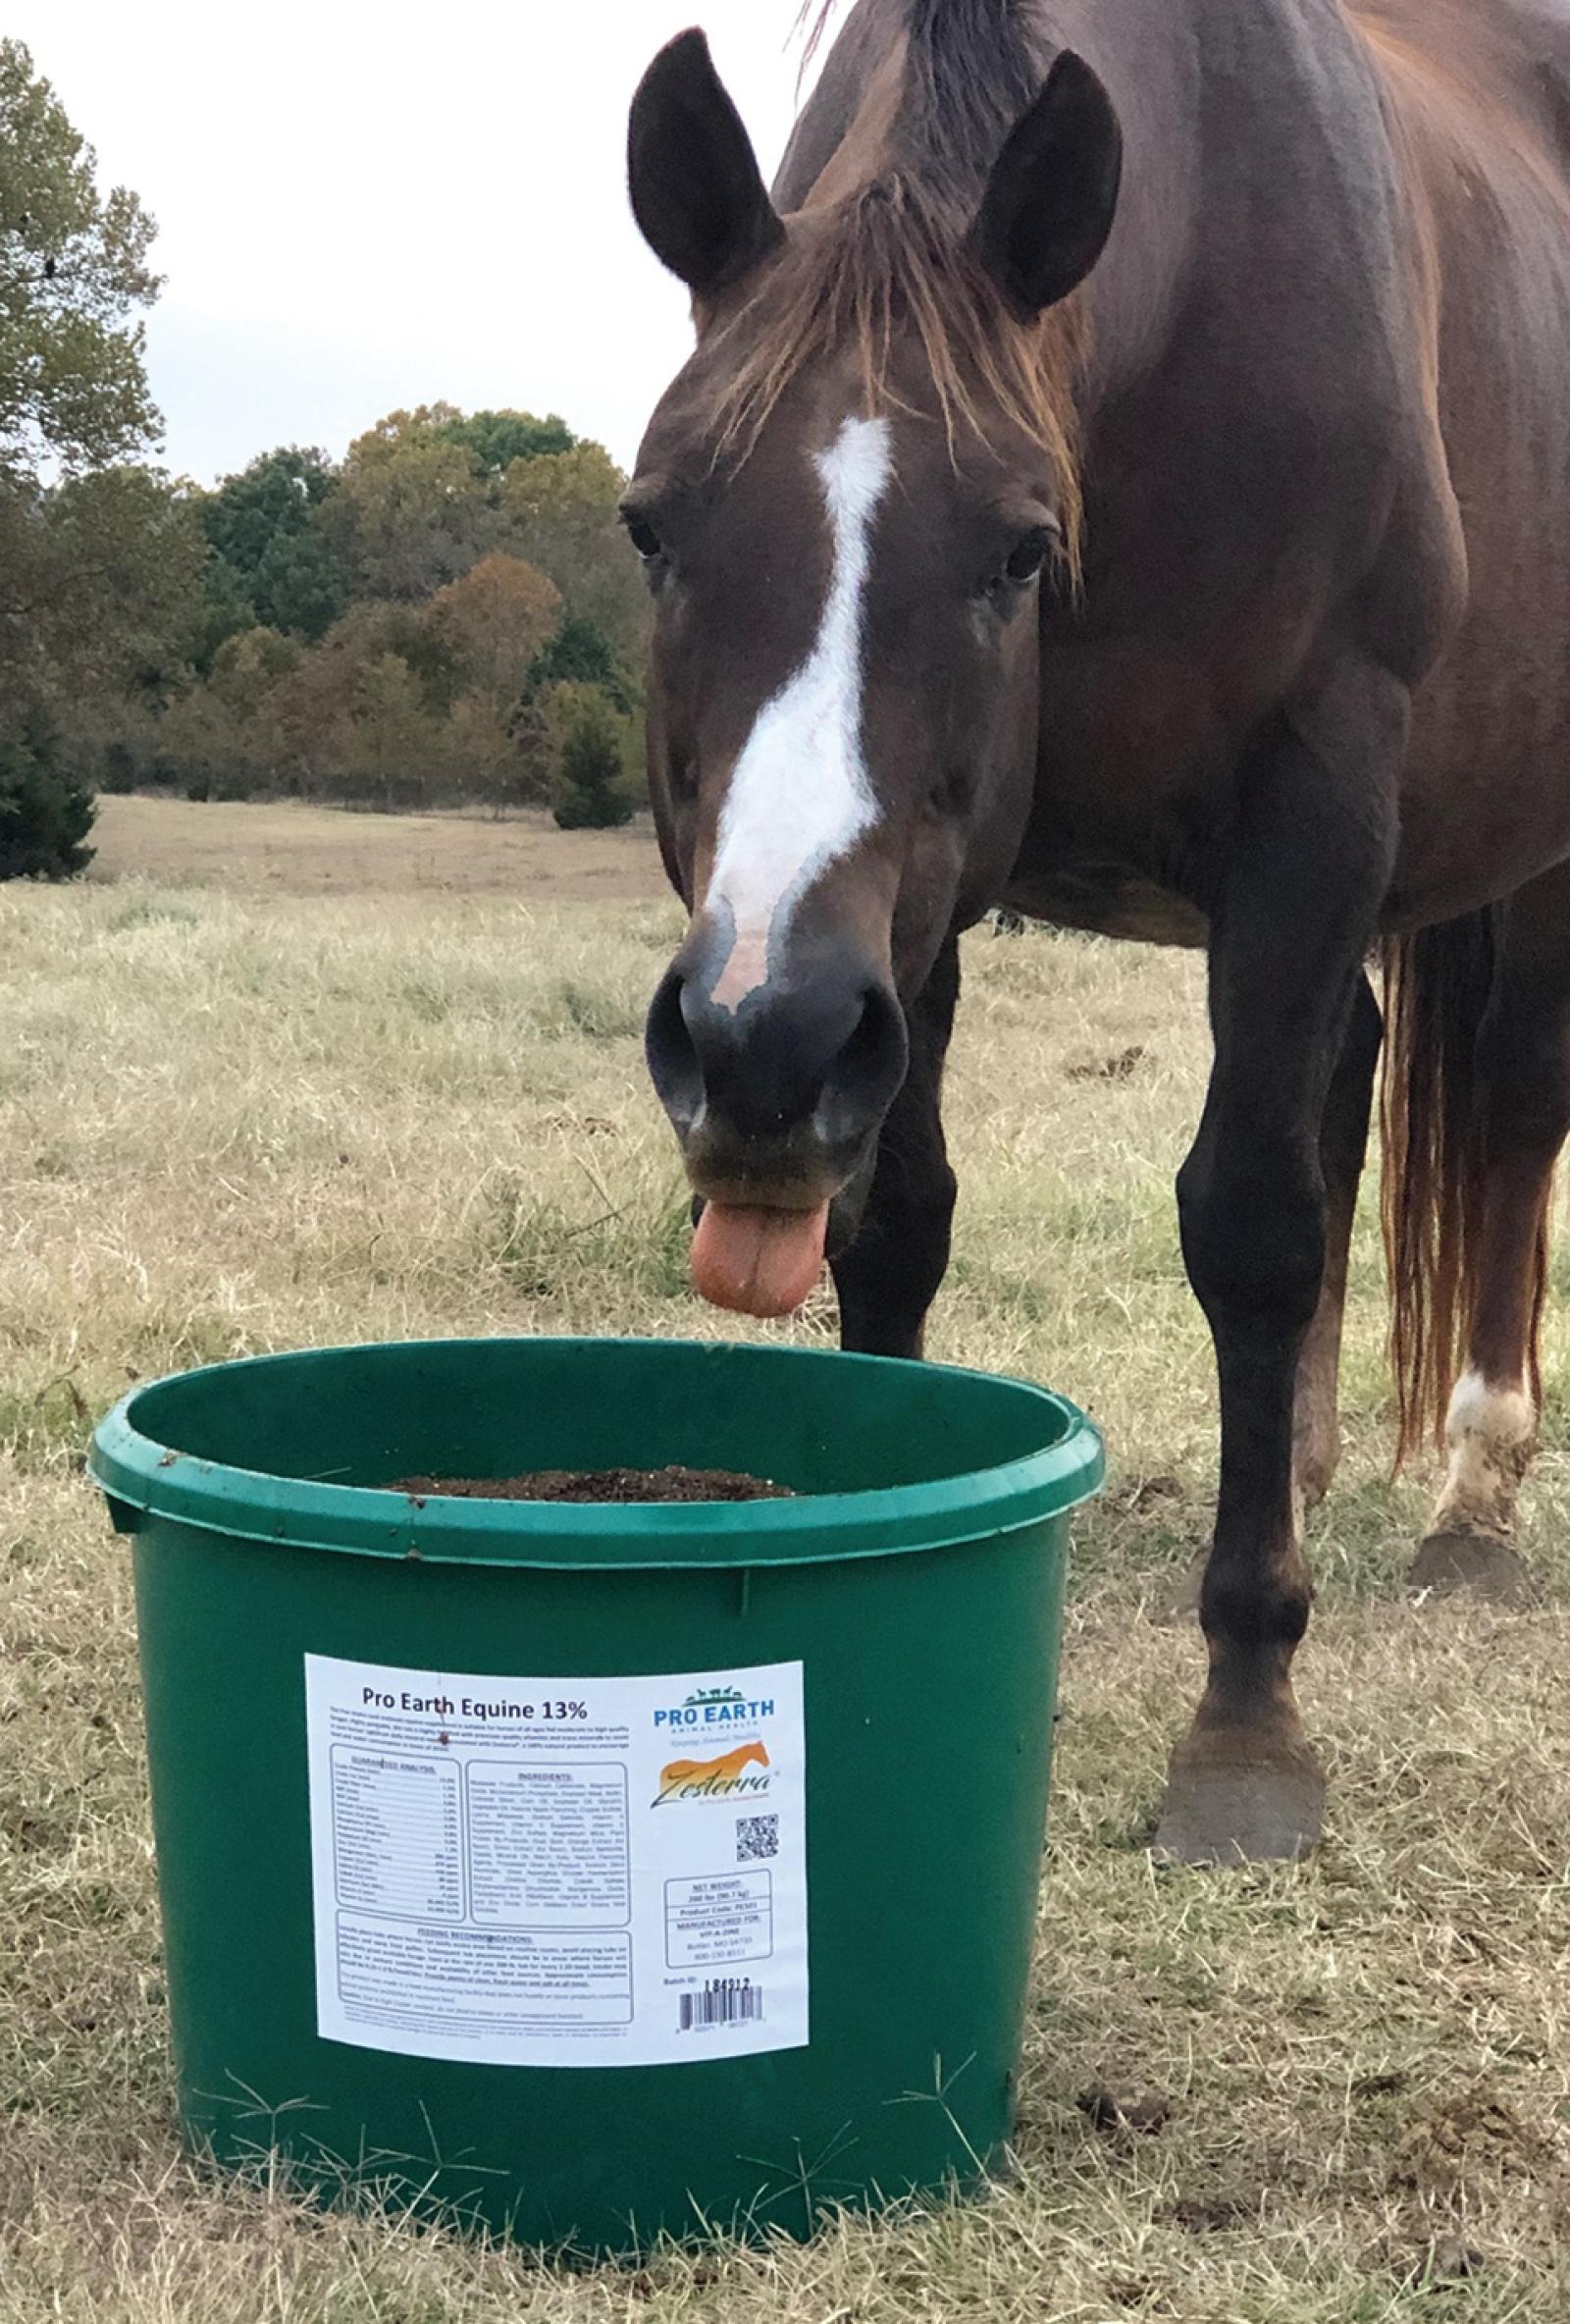 Pro Earth Equine Tub with Zesterra